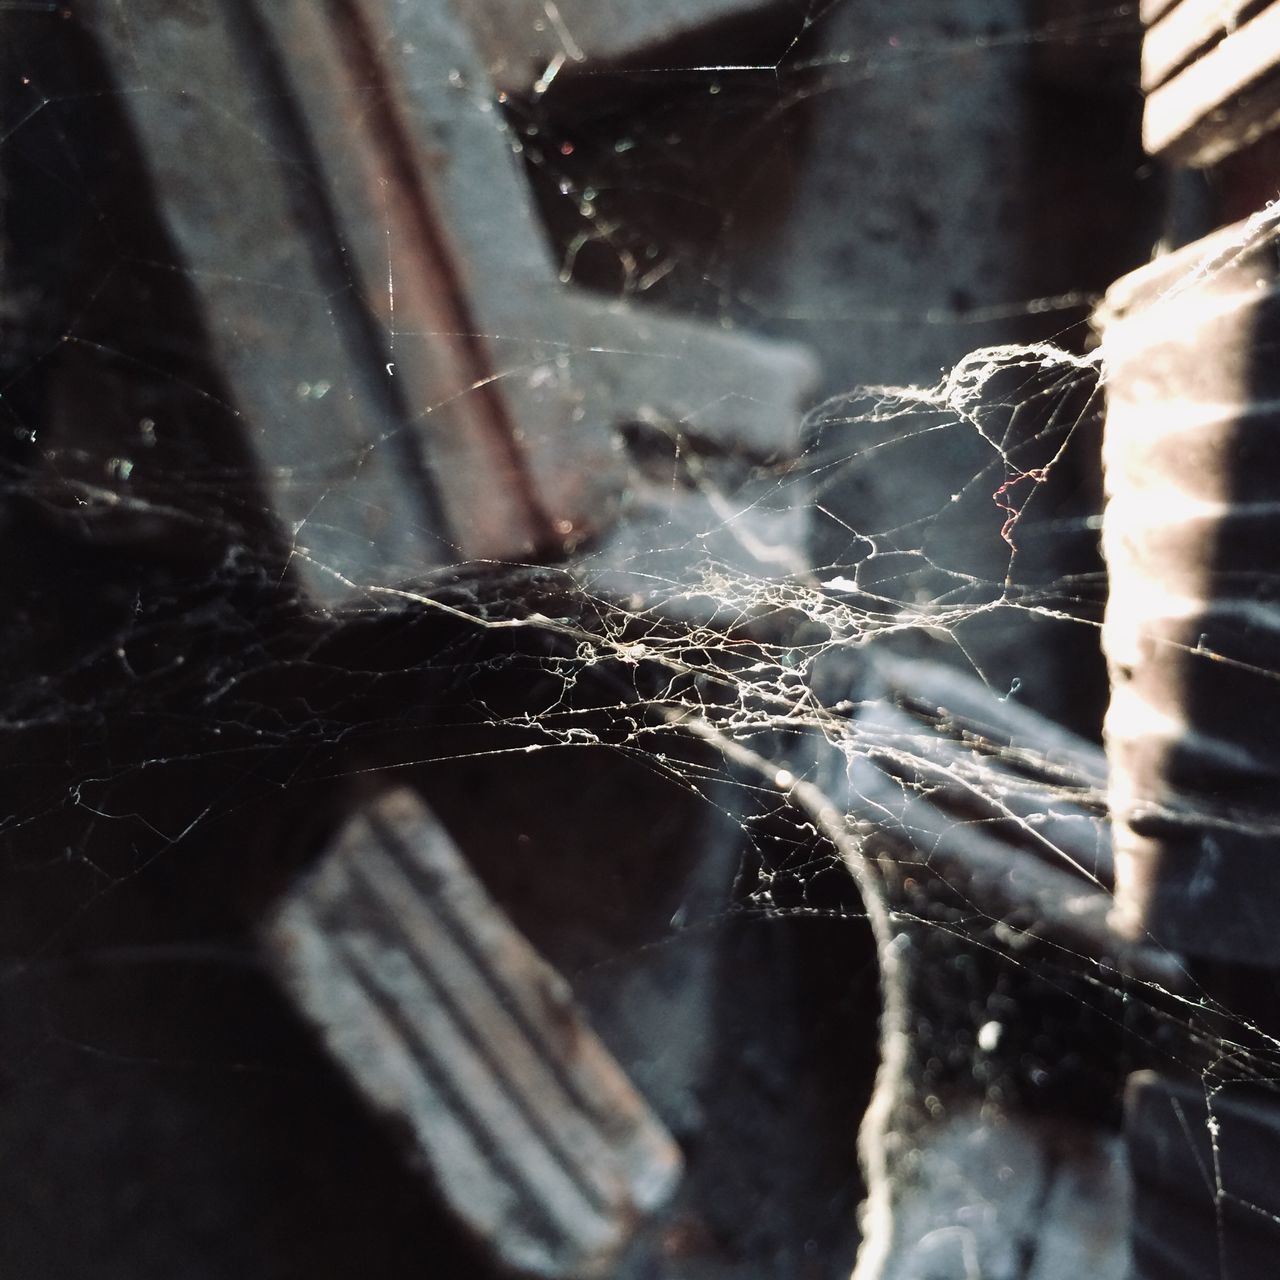 CLOSE-UP OF BROKEN GLASS WINDOW WITH SPIDER WEB